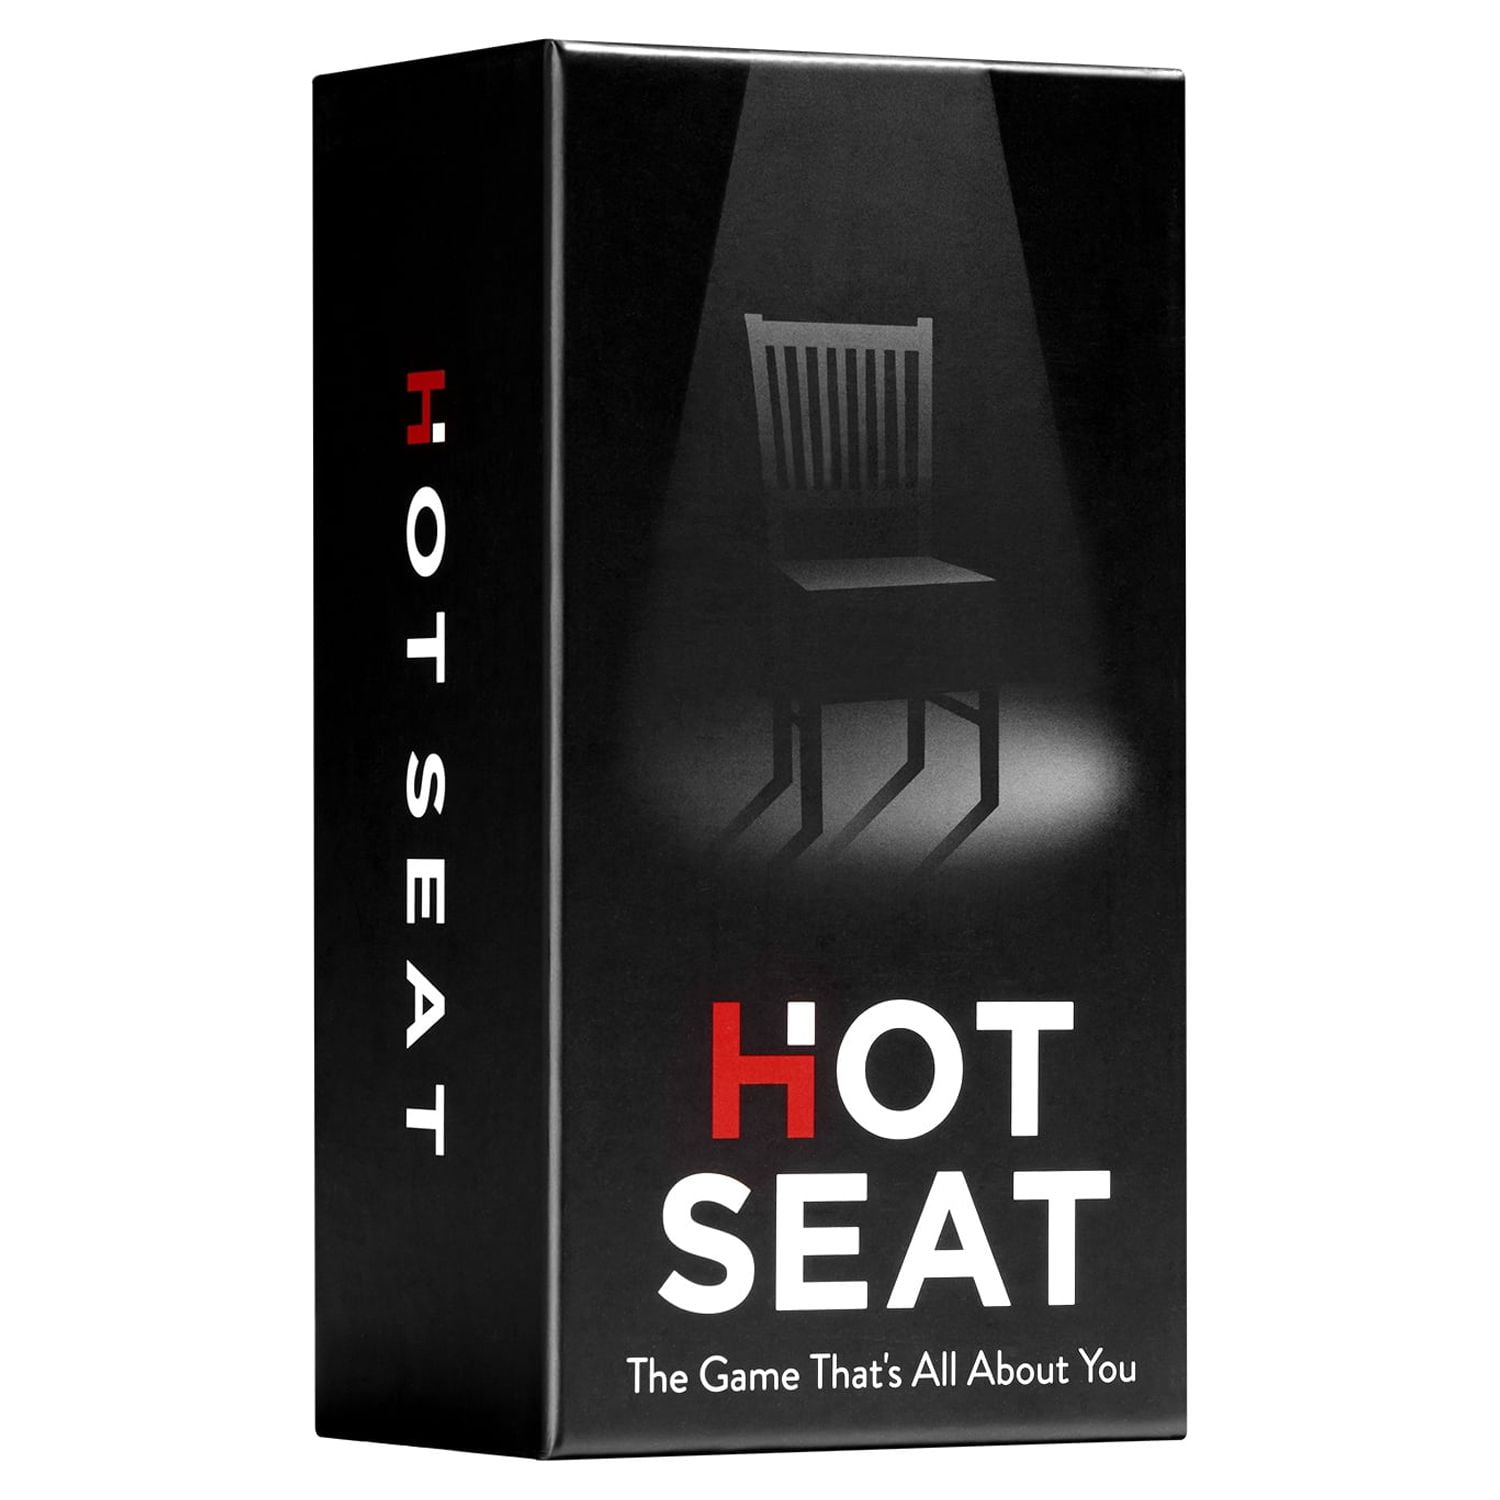 The Game of HOTSEAT the Ultimate Get-to-know-you Game 1997 